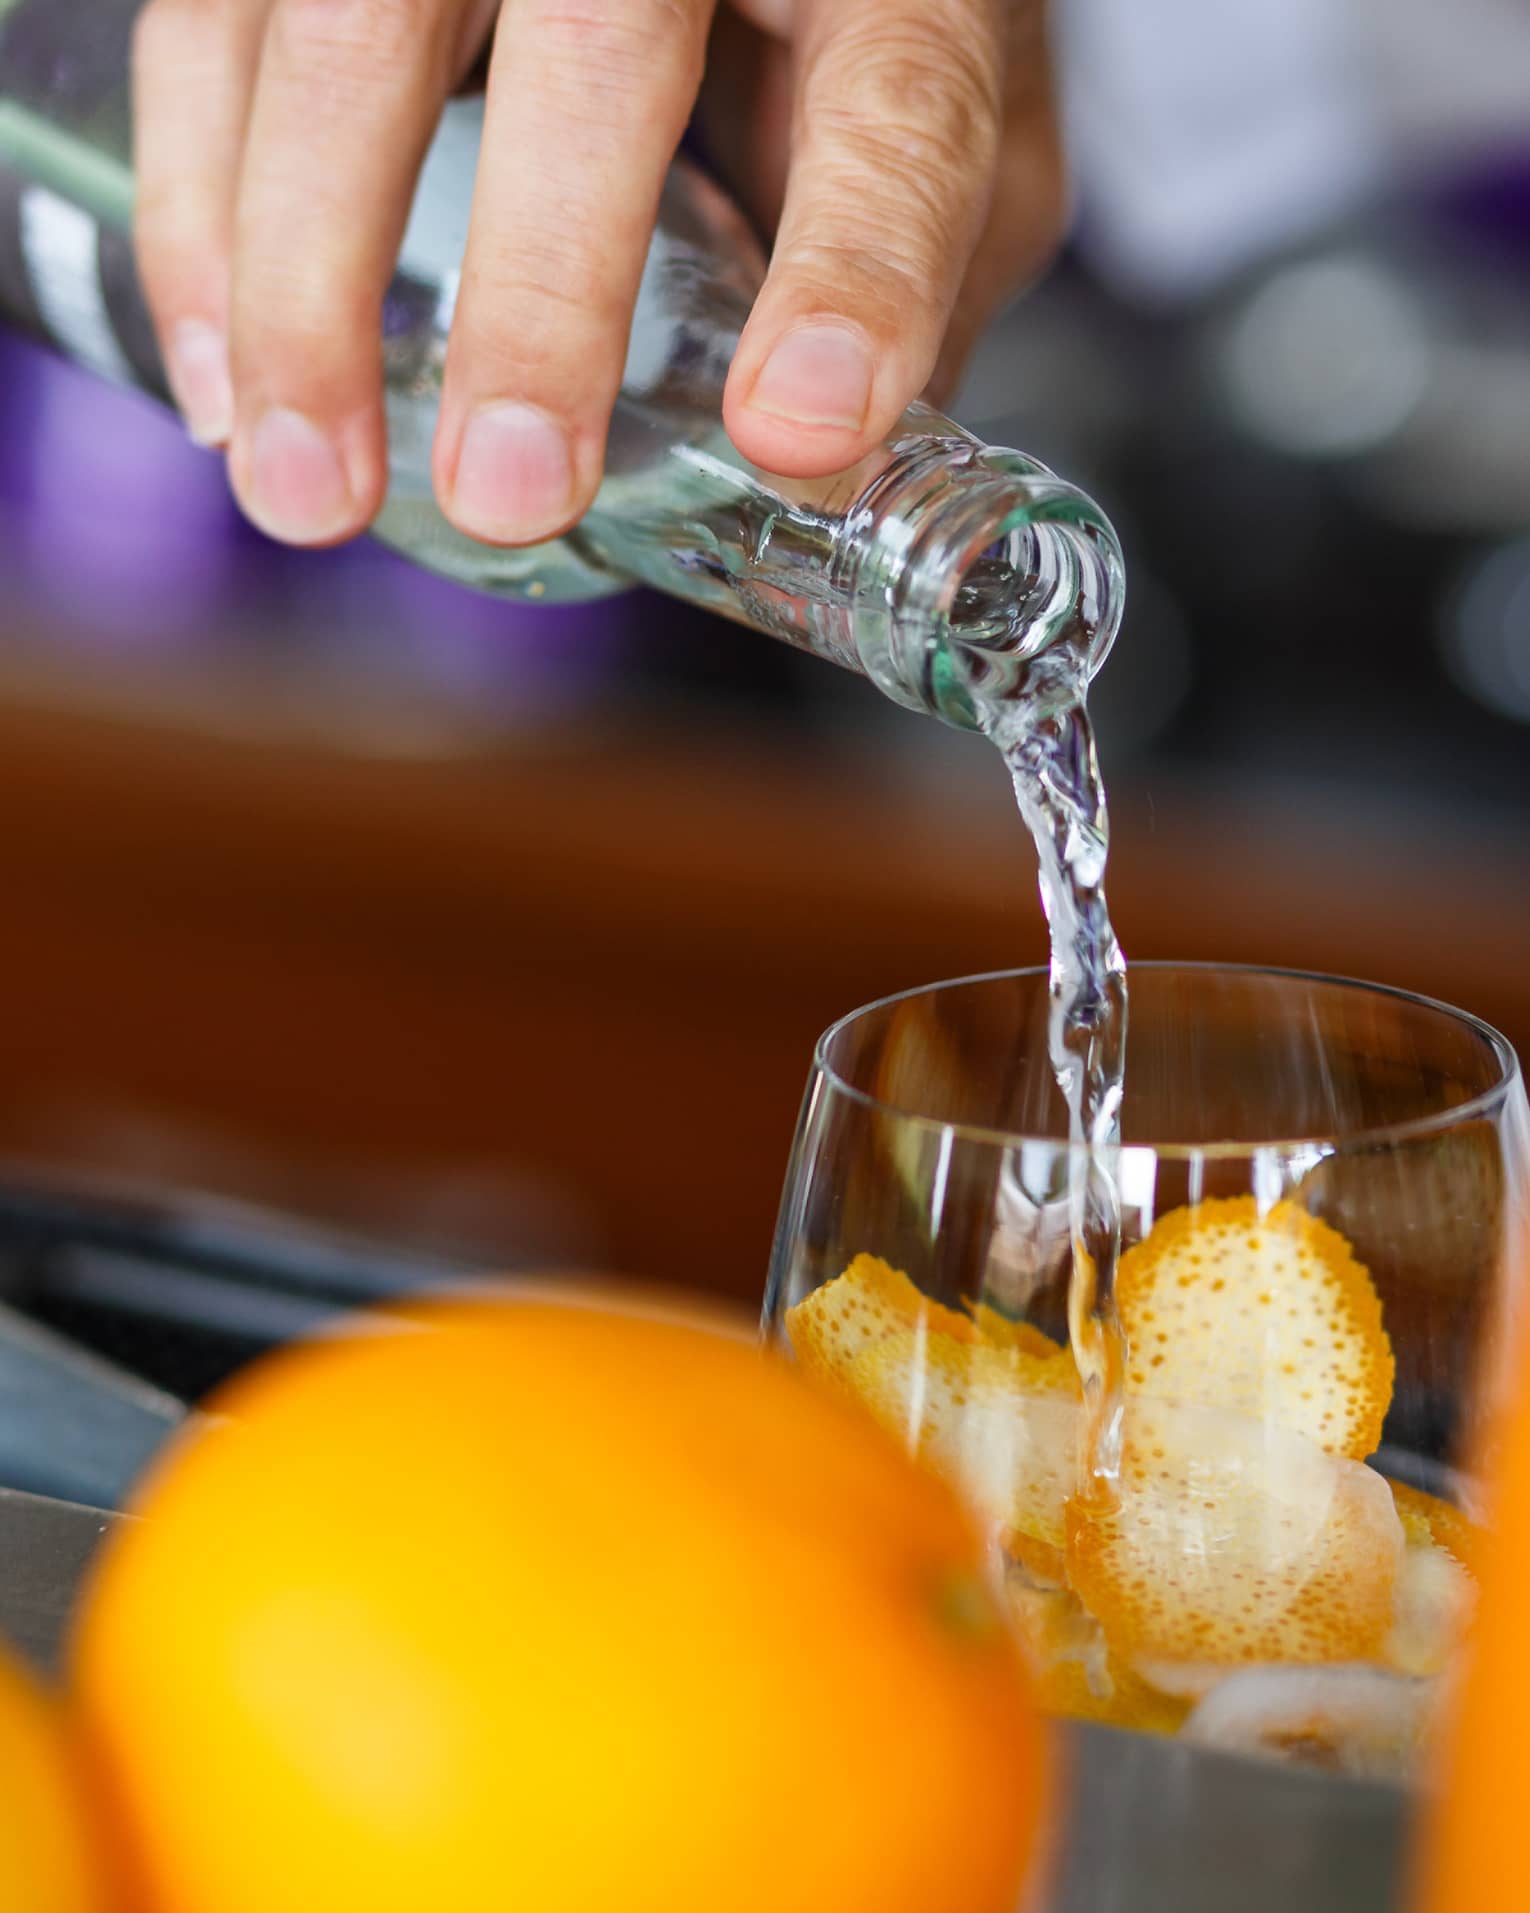 A hand pours clear liquid from a bottle into a glass filled with orange rind; in the foreground, whole oranges and a carafe.